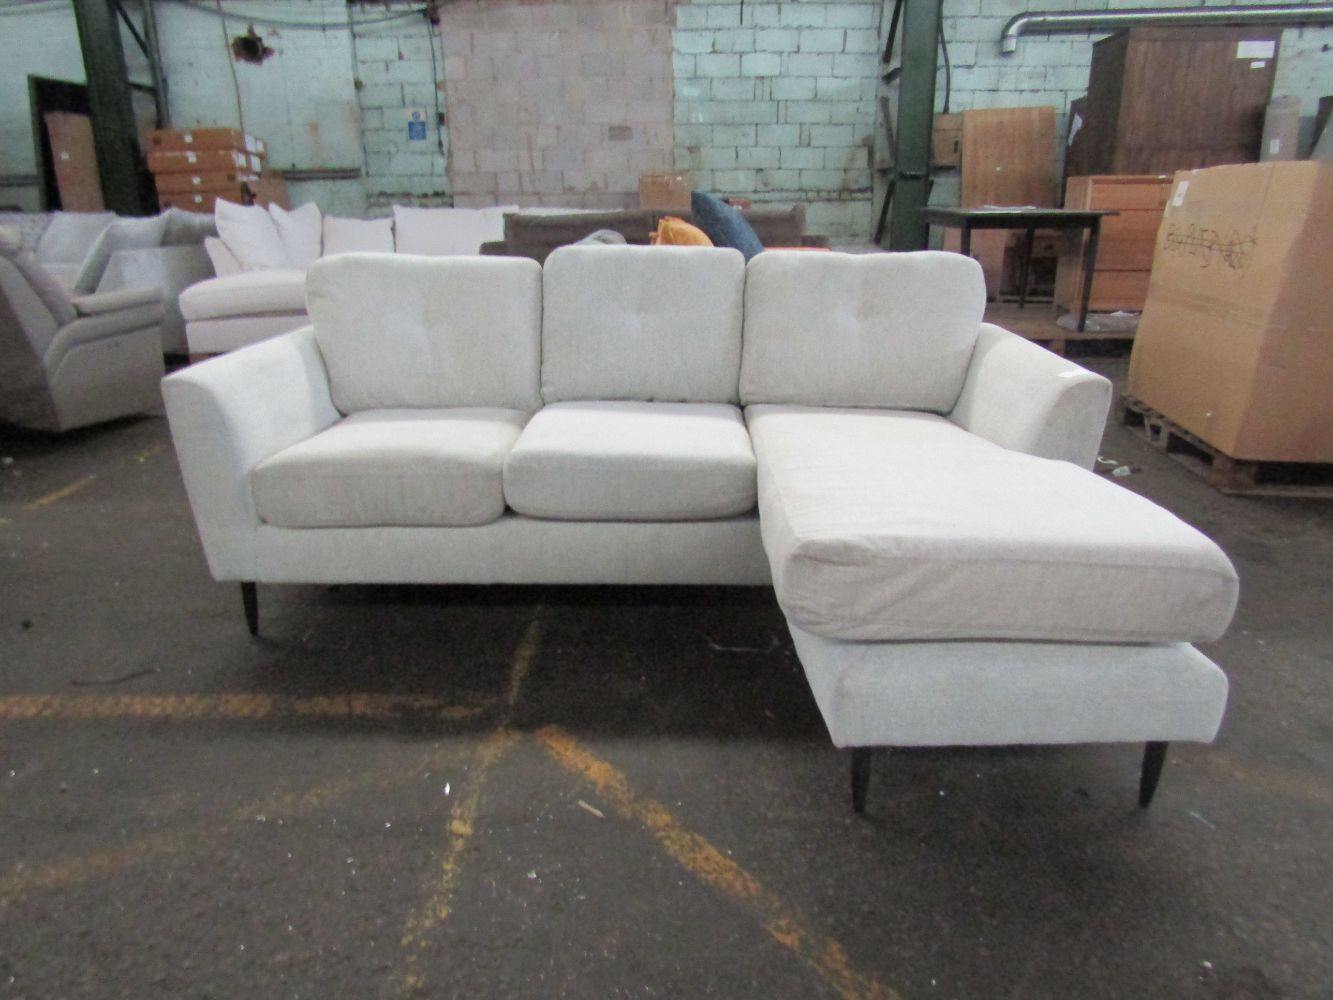 Sofas and chairs from SCS, Oak Funriture land, Heals and more.